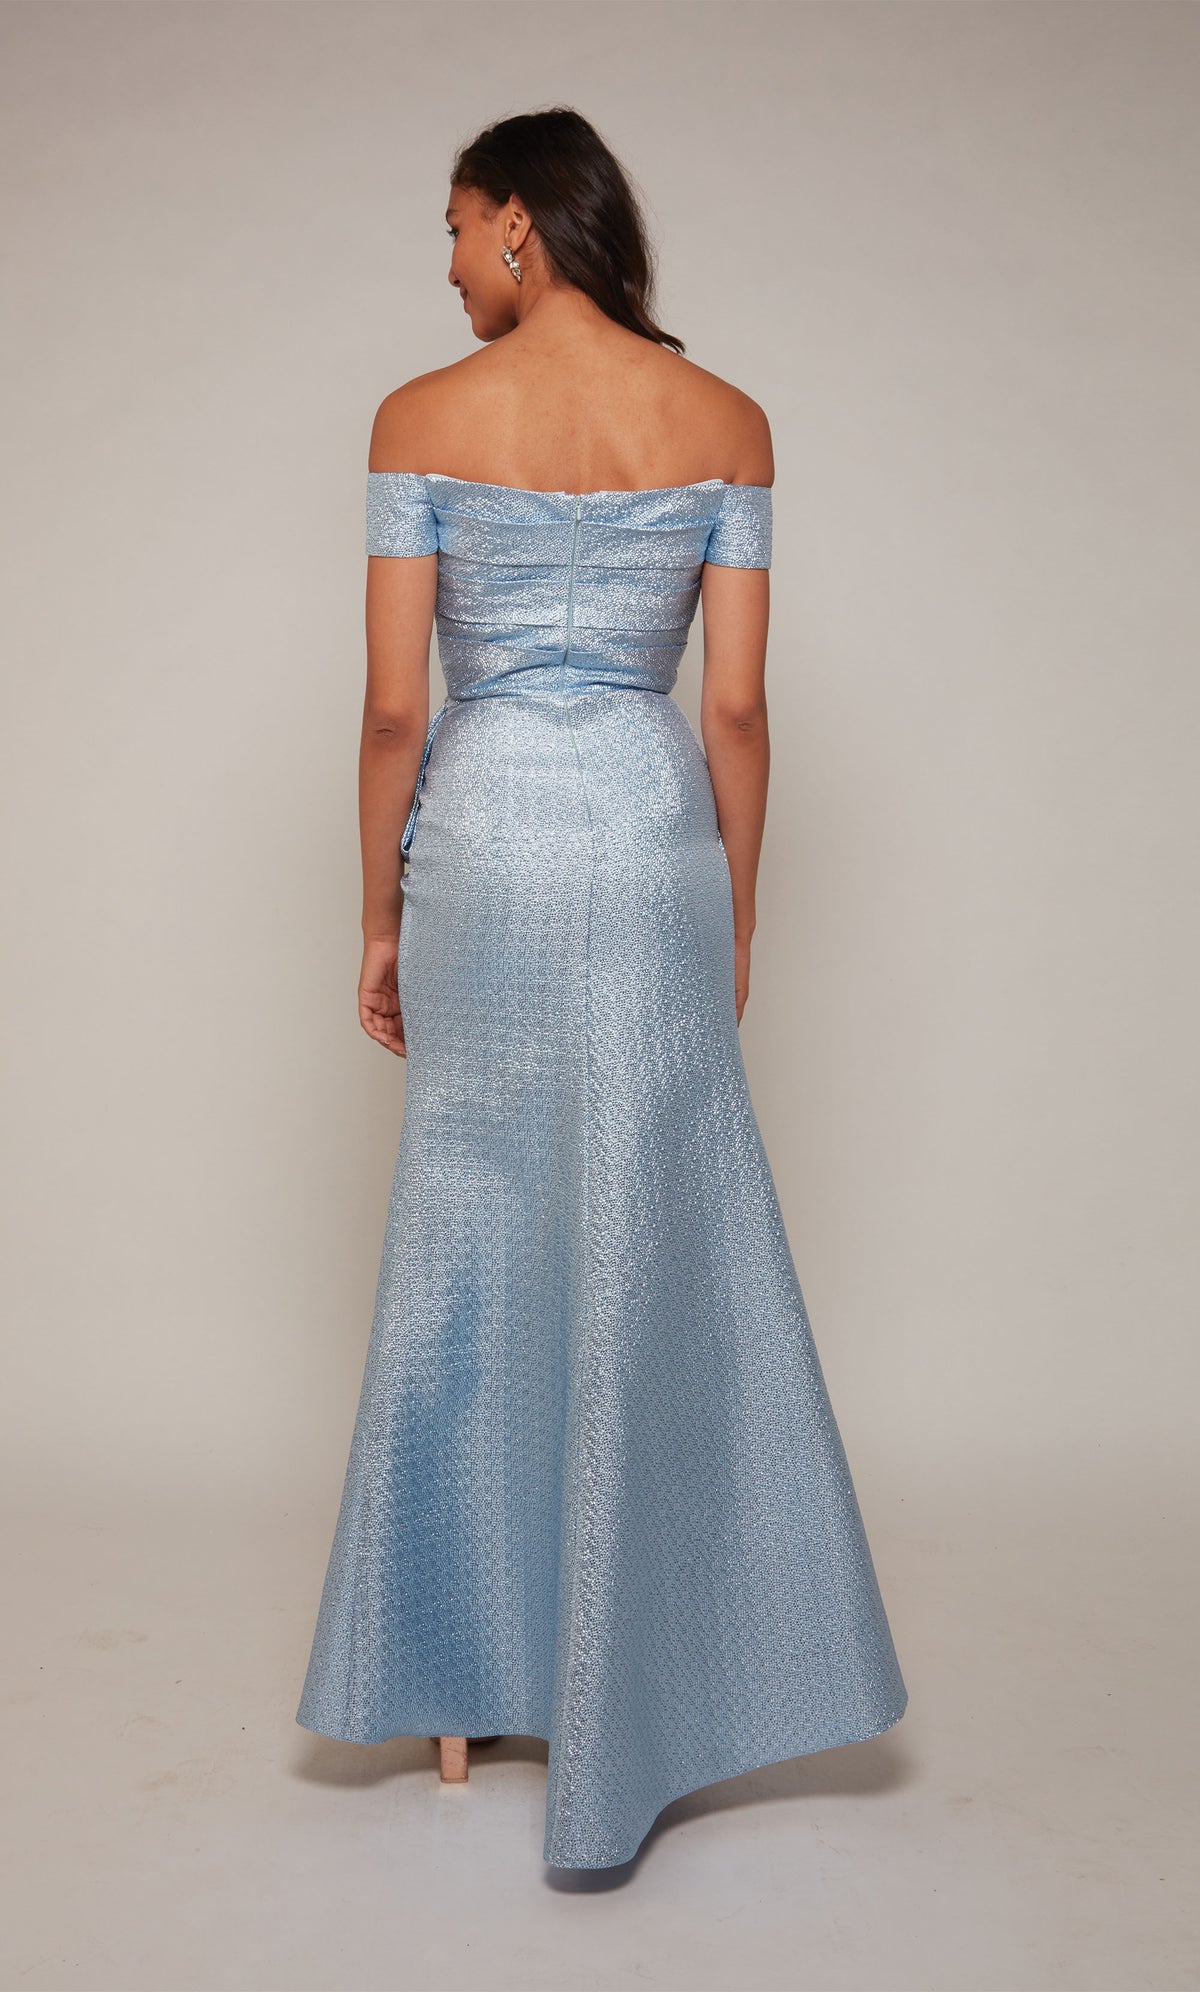 Off the shoulder metallic formal dress with pleated bodice and zip up back in french blue.